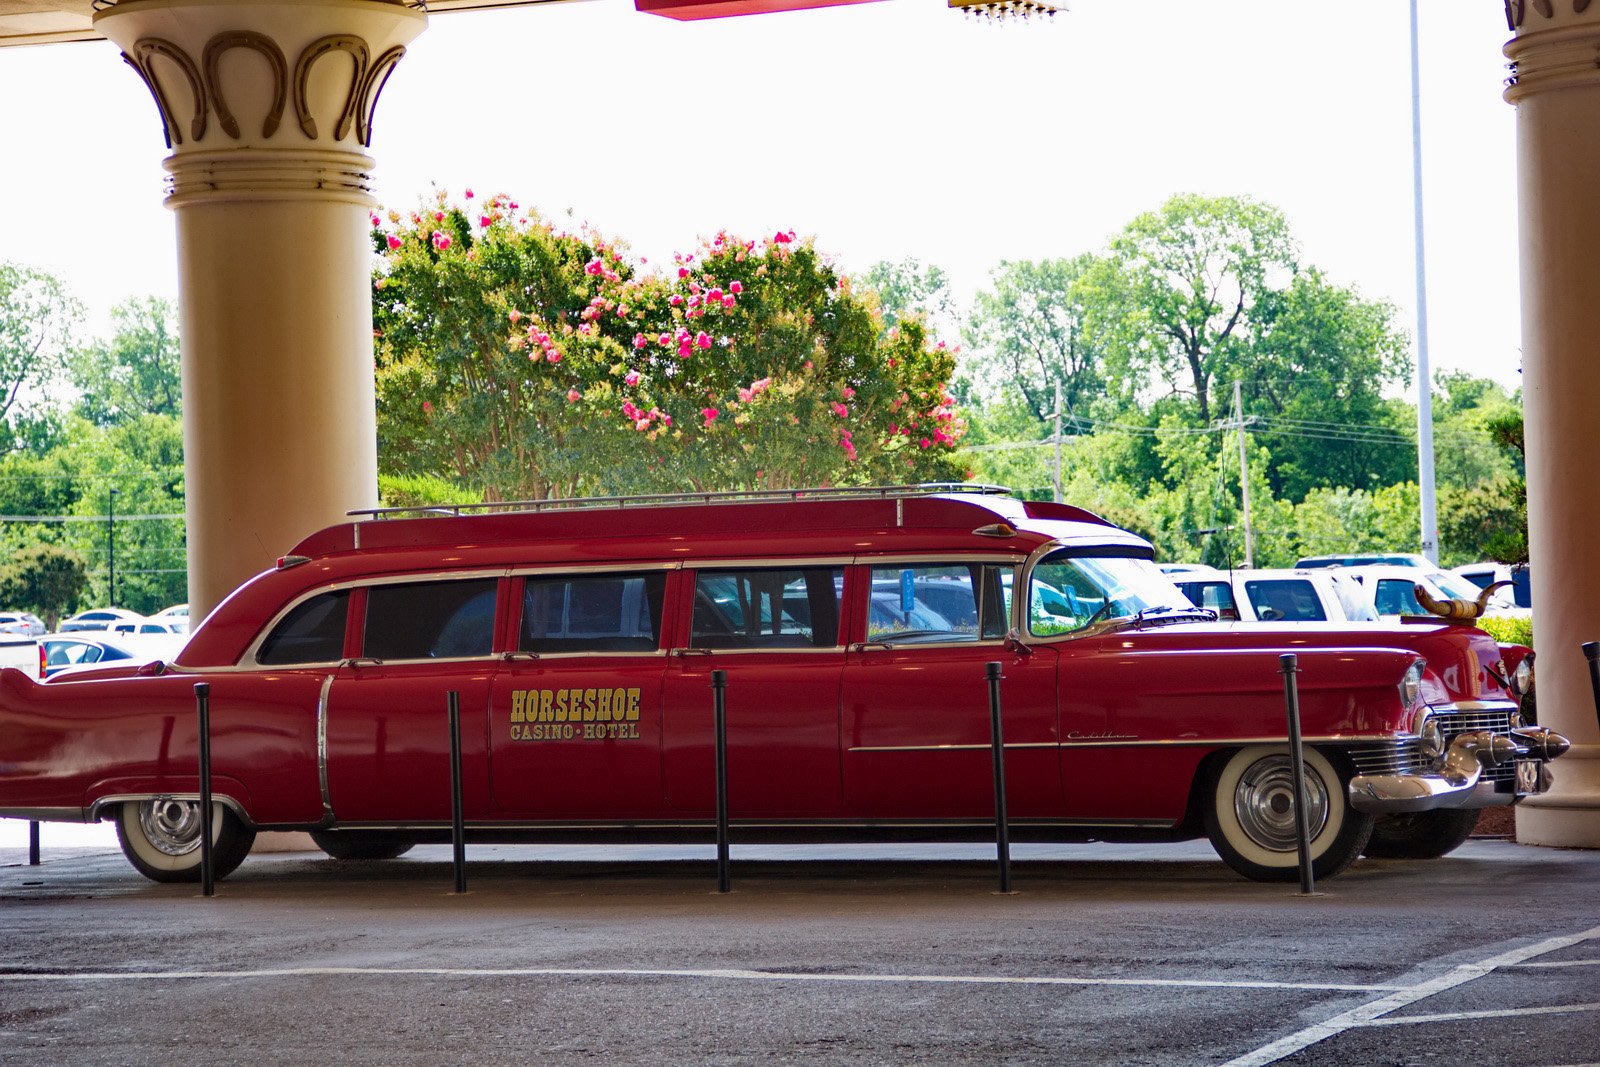 Outside Harrah's, Mississippi sits this Texas looking limo.